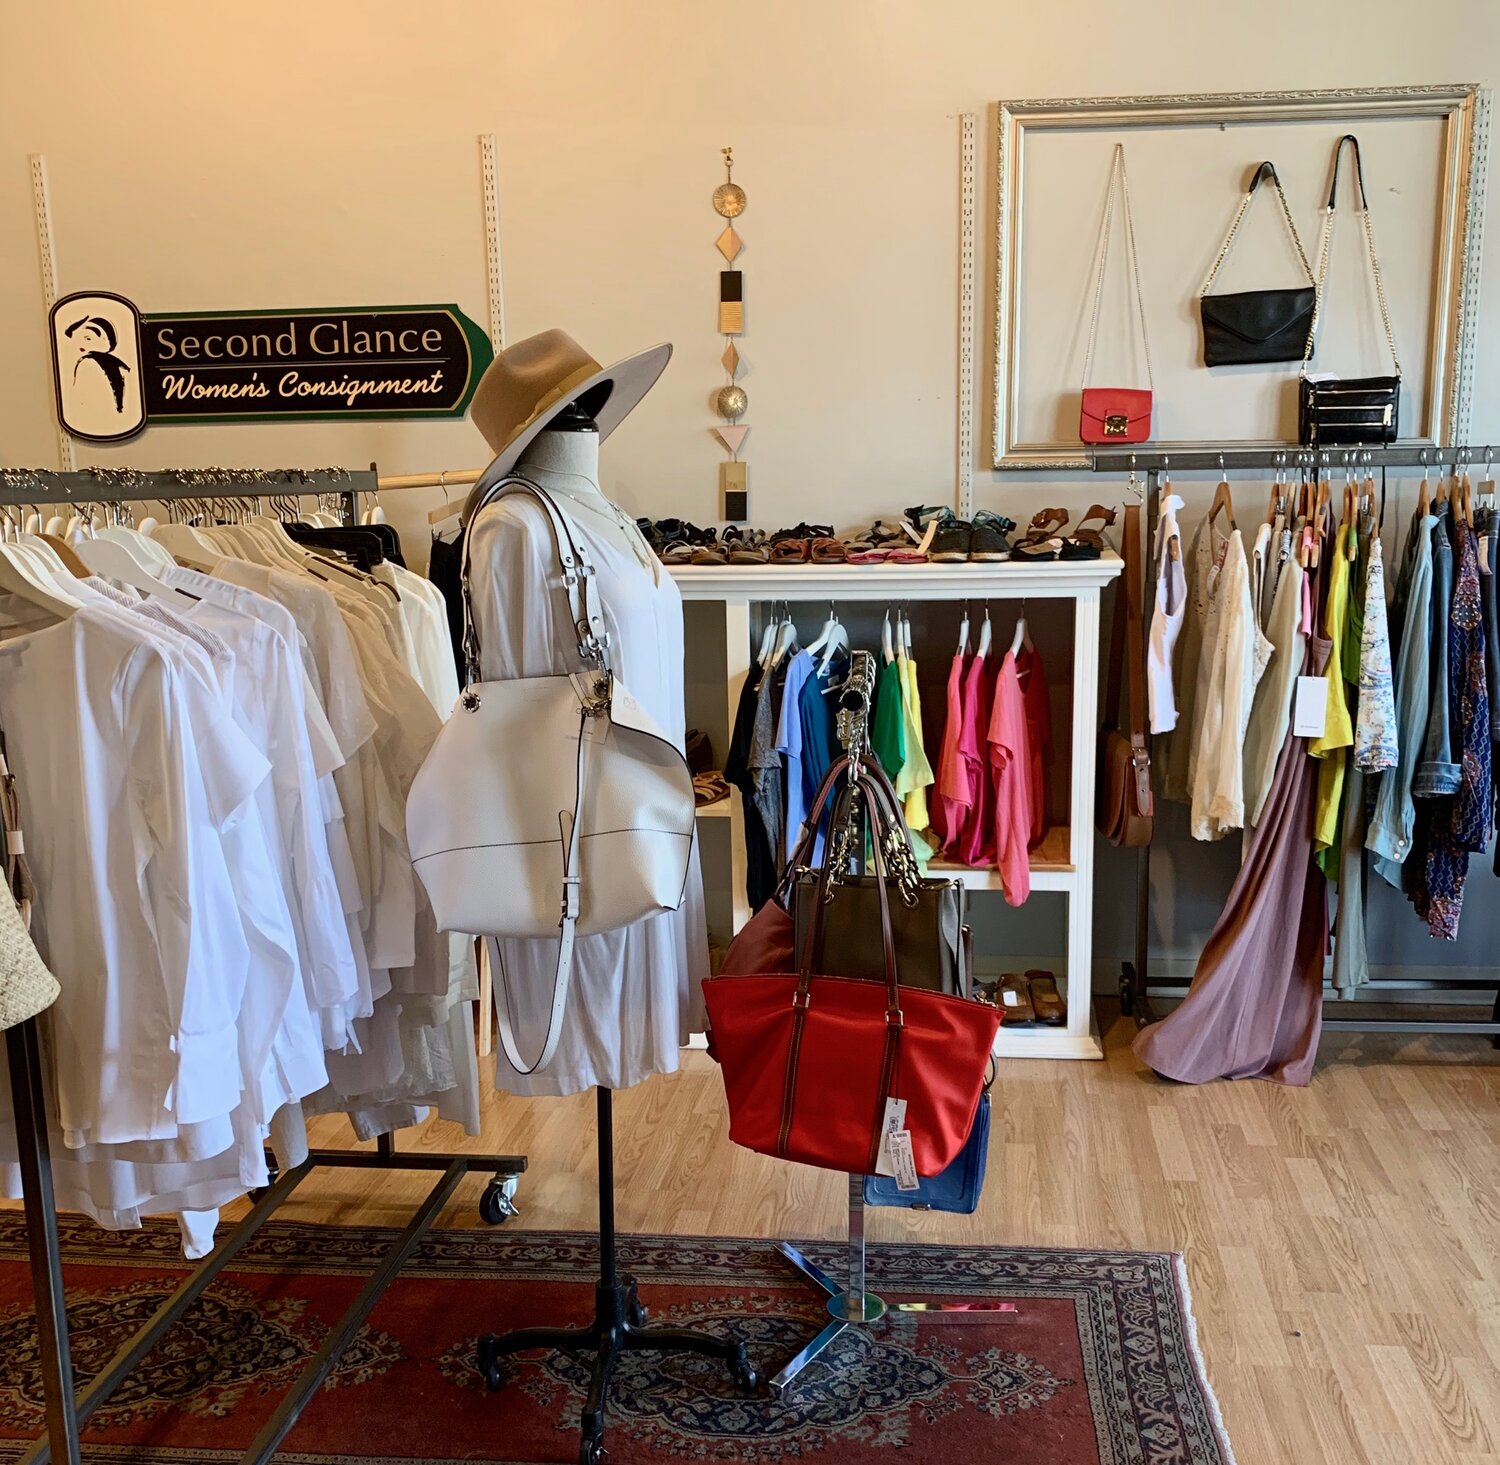 About — upscale consignment boutique